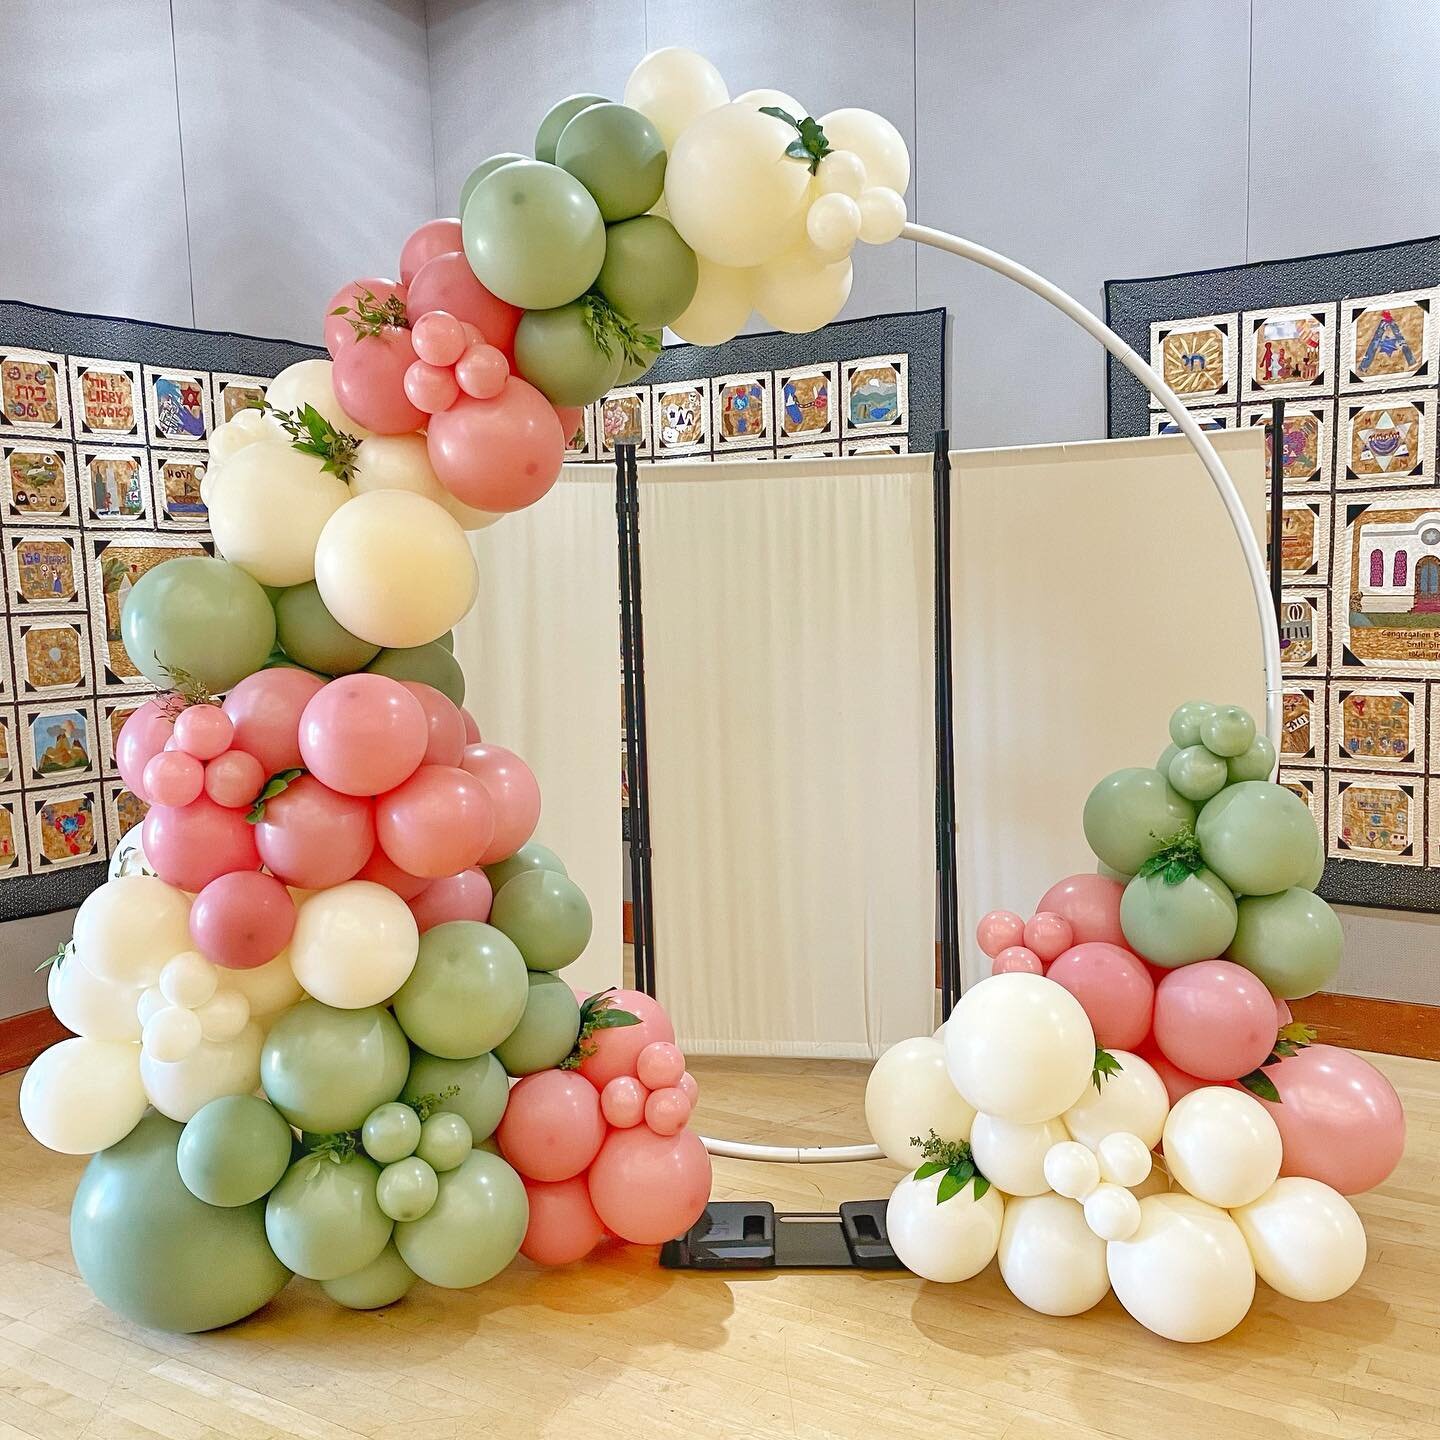 Sometimes all you need is a simple, elegant balloon hoop to make a colorful impact at your event. 

This piece filled with sage, rose, and ivory tones was a fun statement at a special Bat Mitzvah.